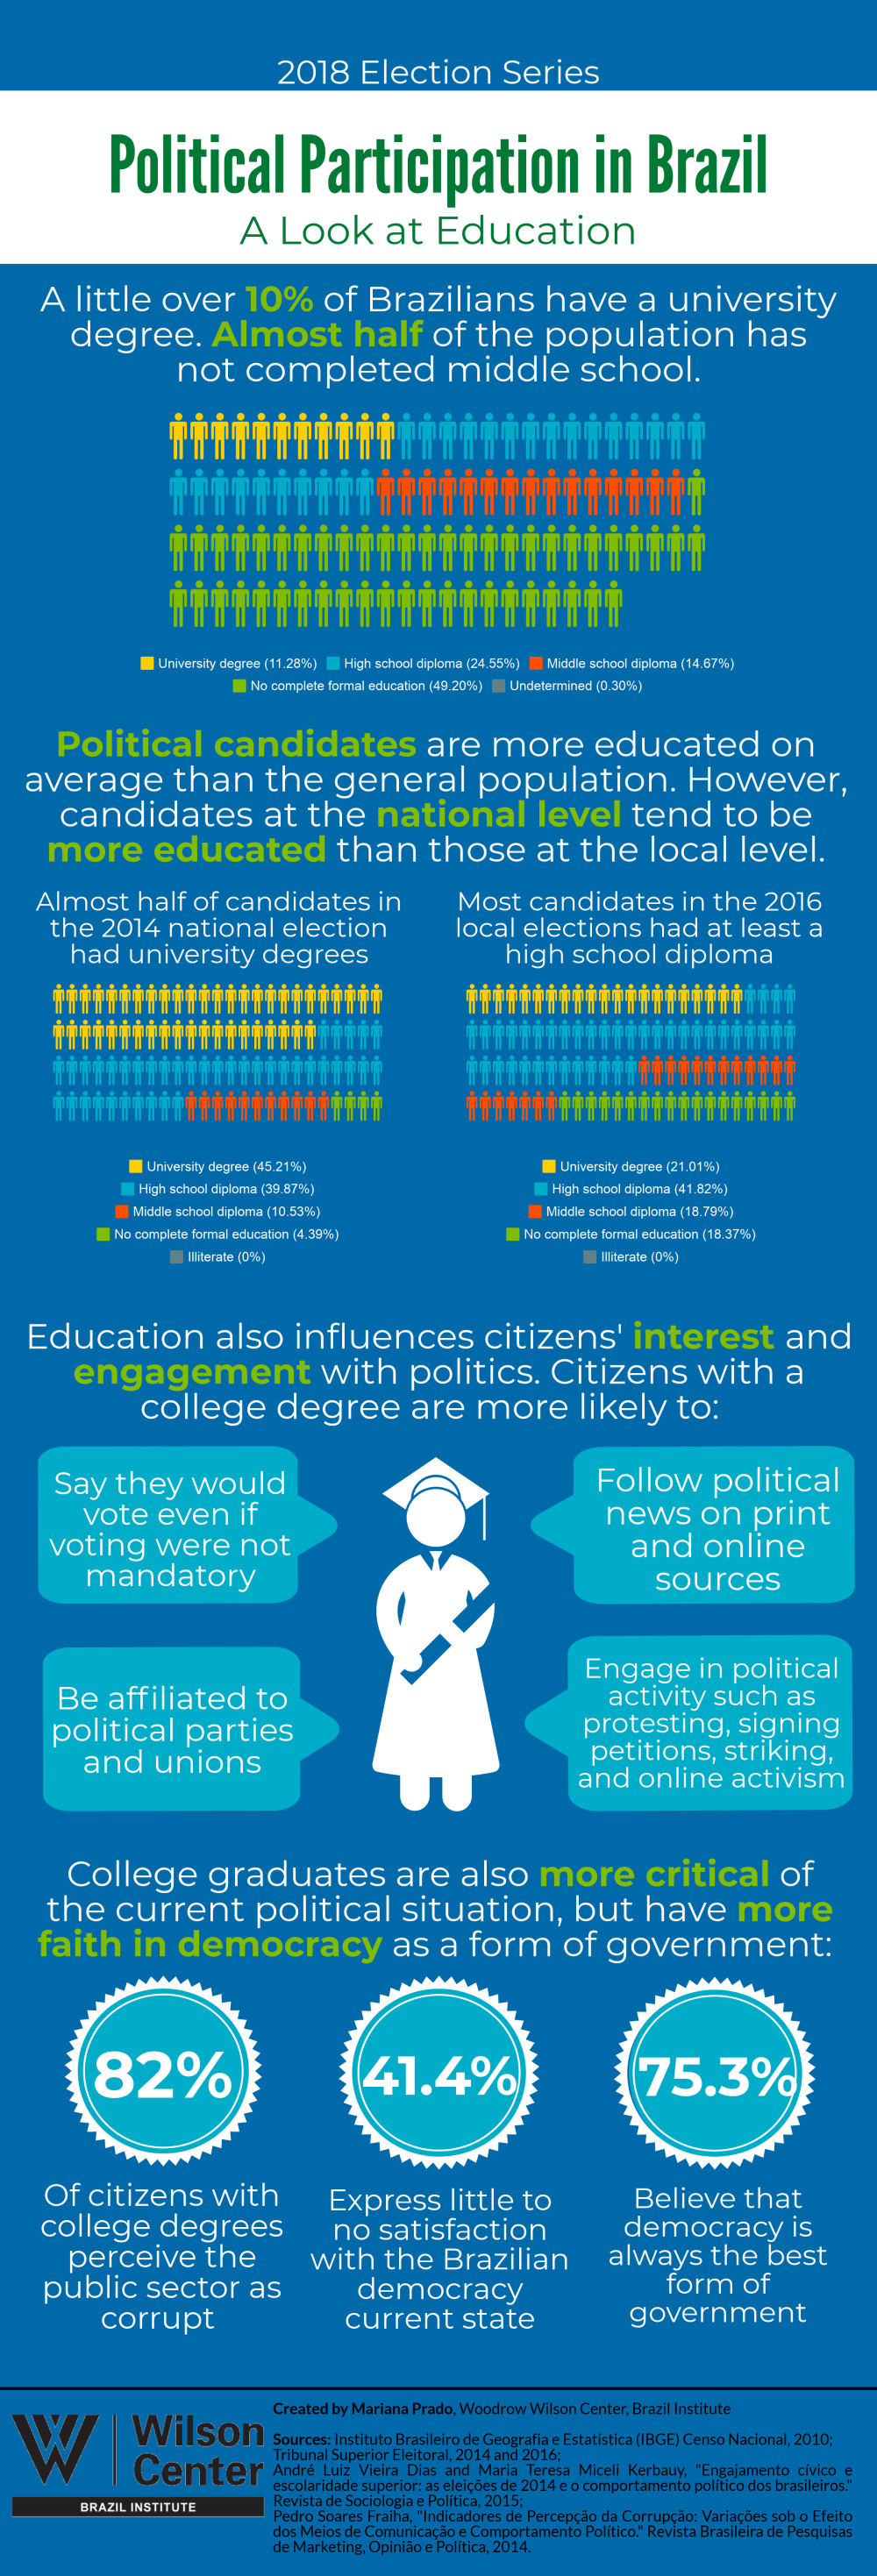 Political Participation in Brazil: A Look at Education